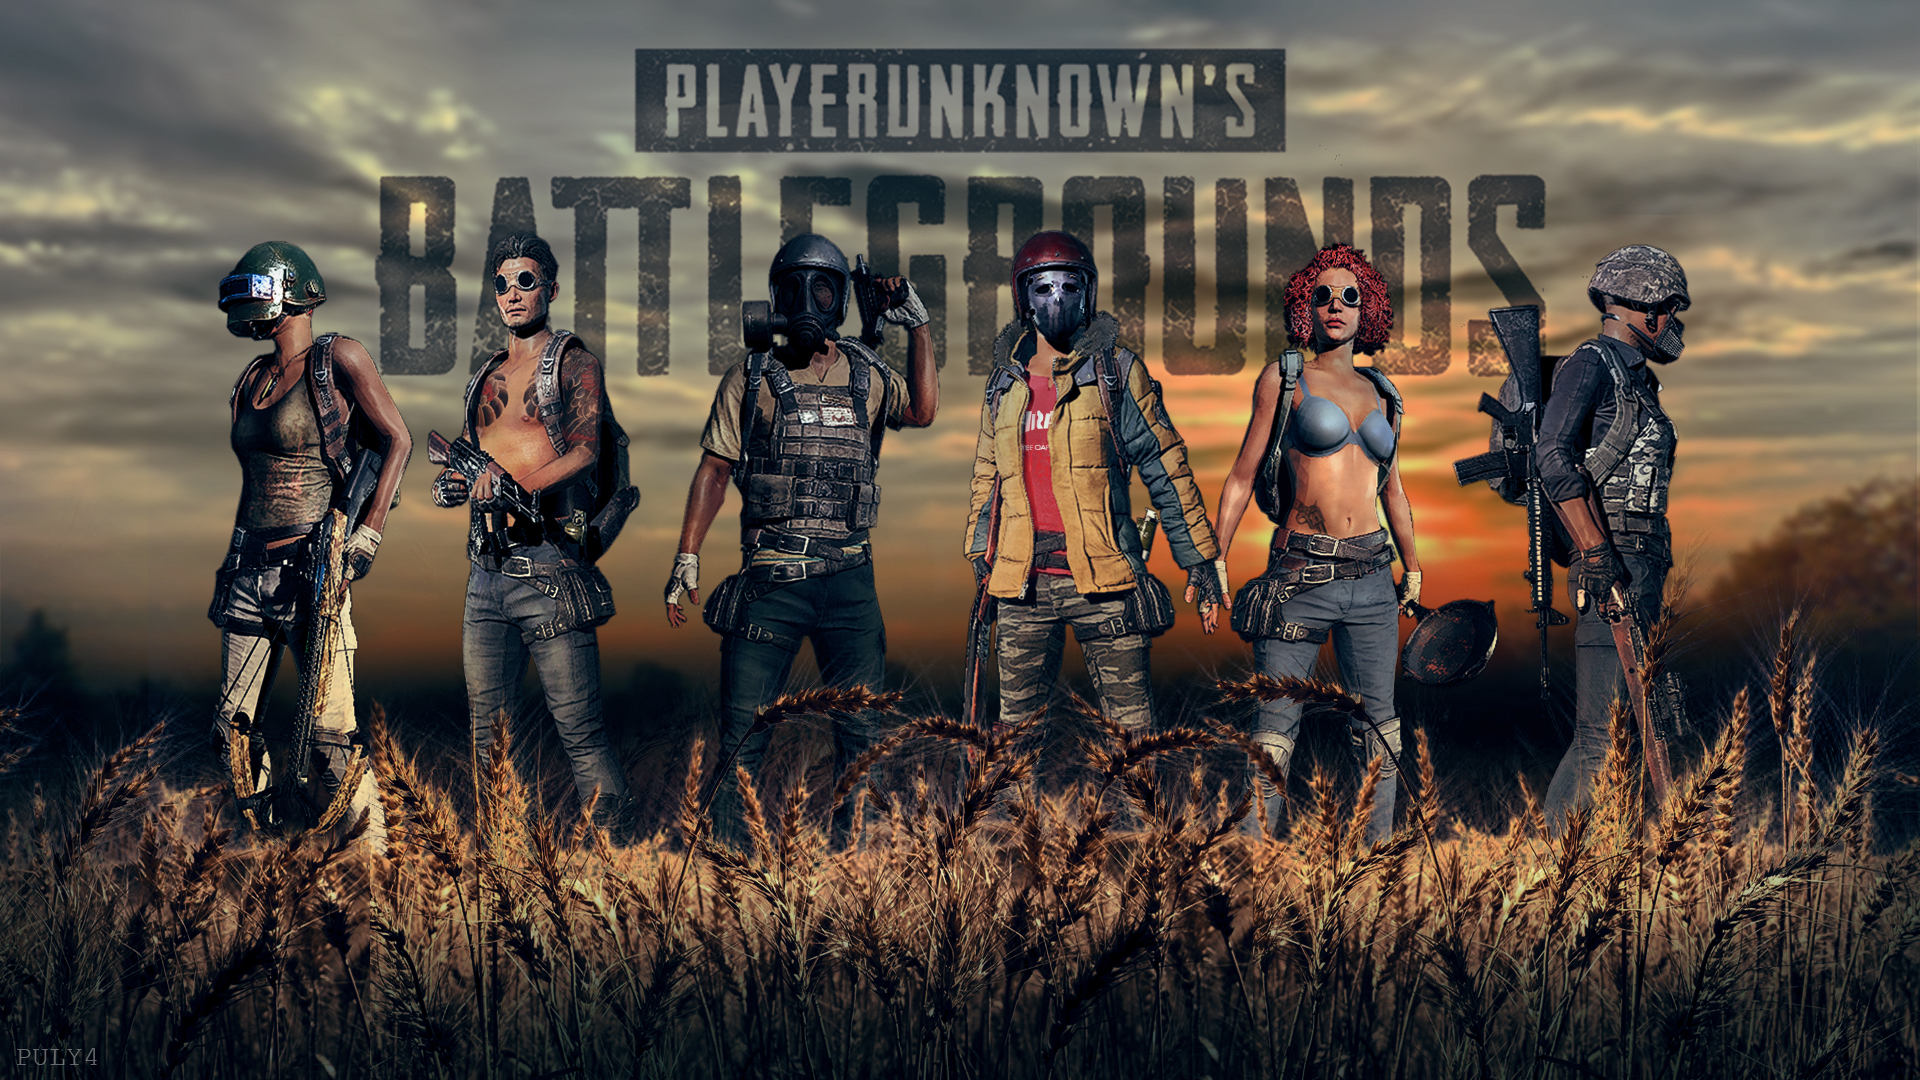 PlayerUnknown's Battlegrounds wallpapers, Pictures, Images